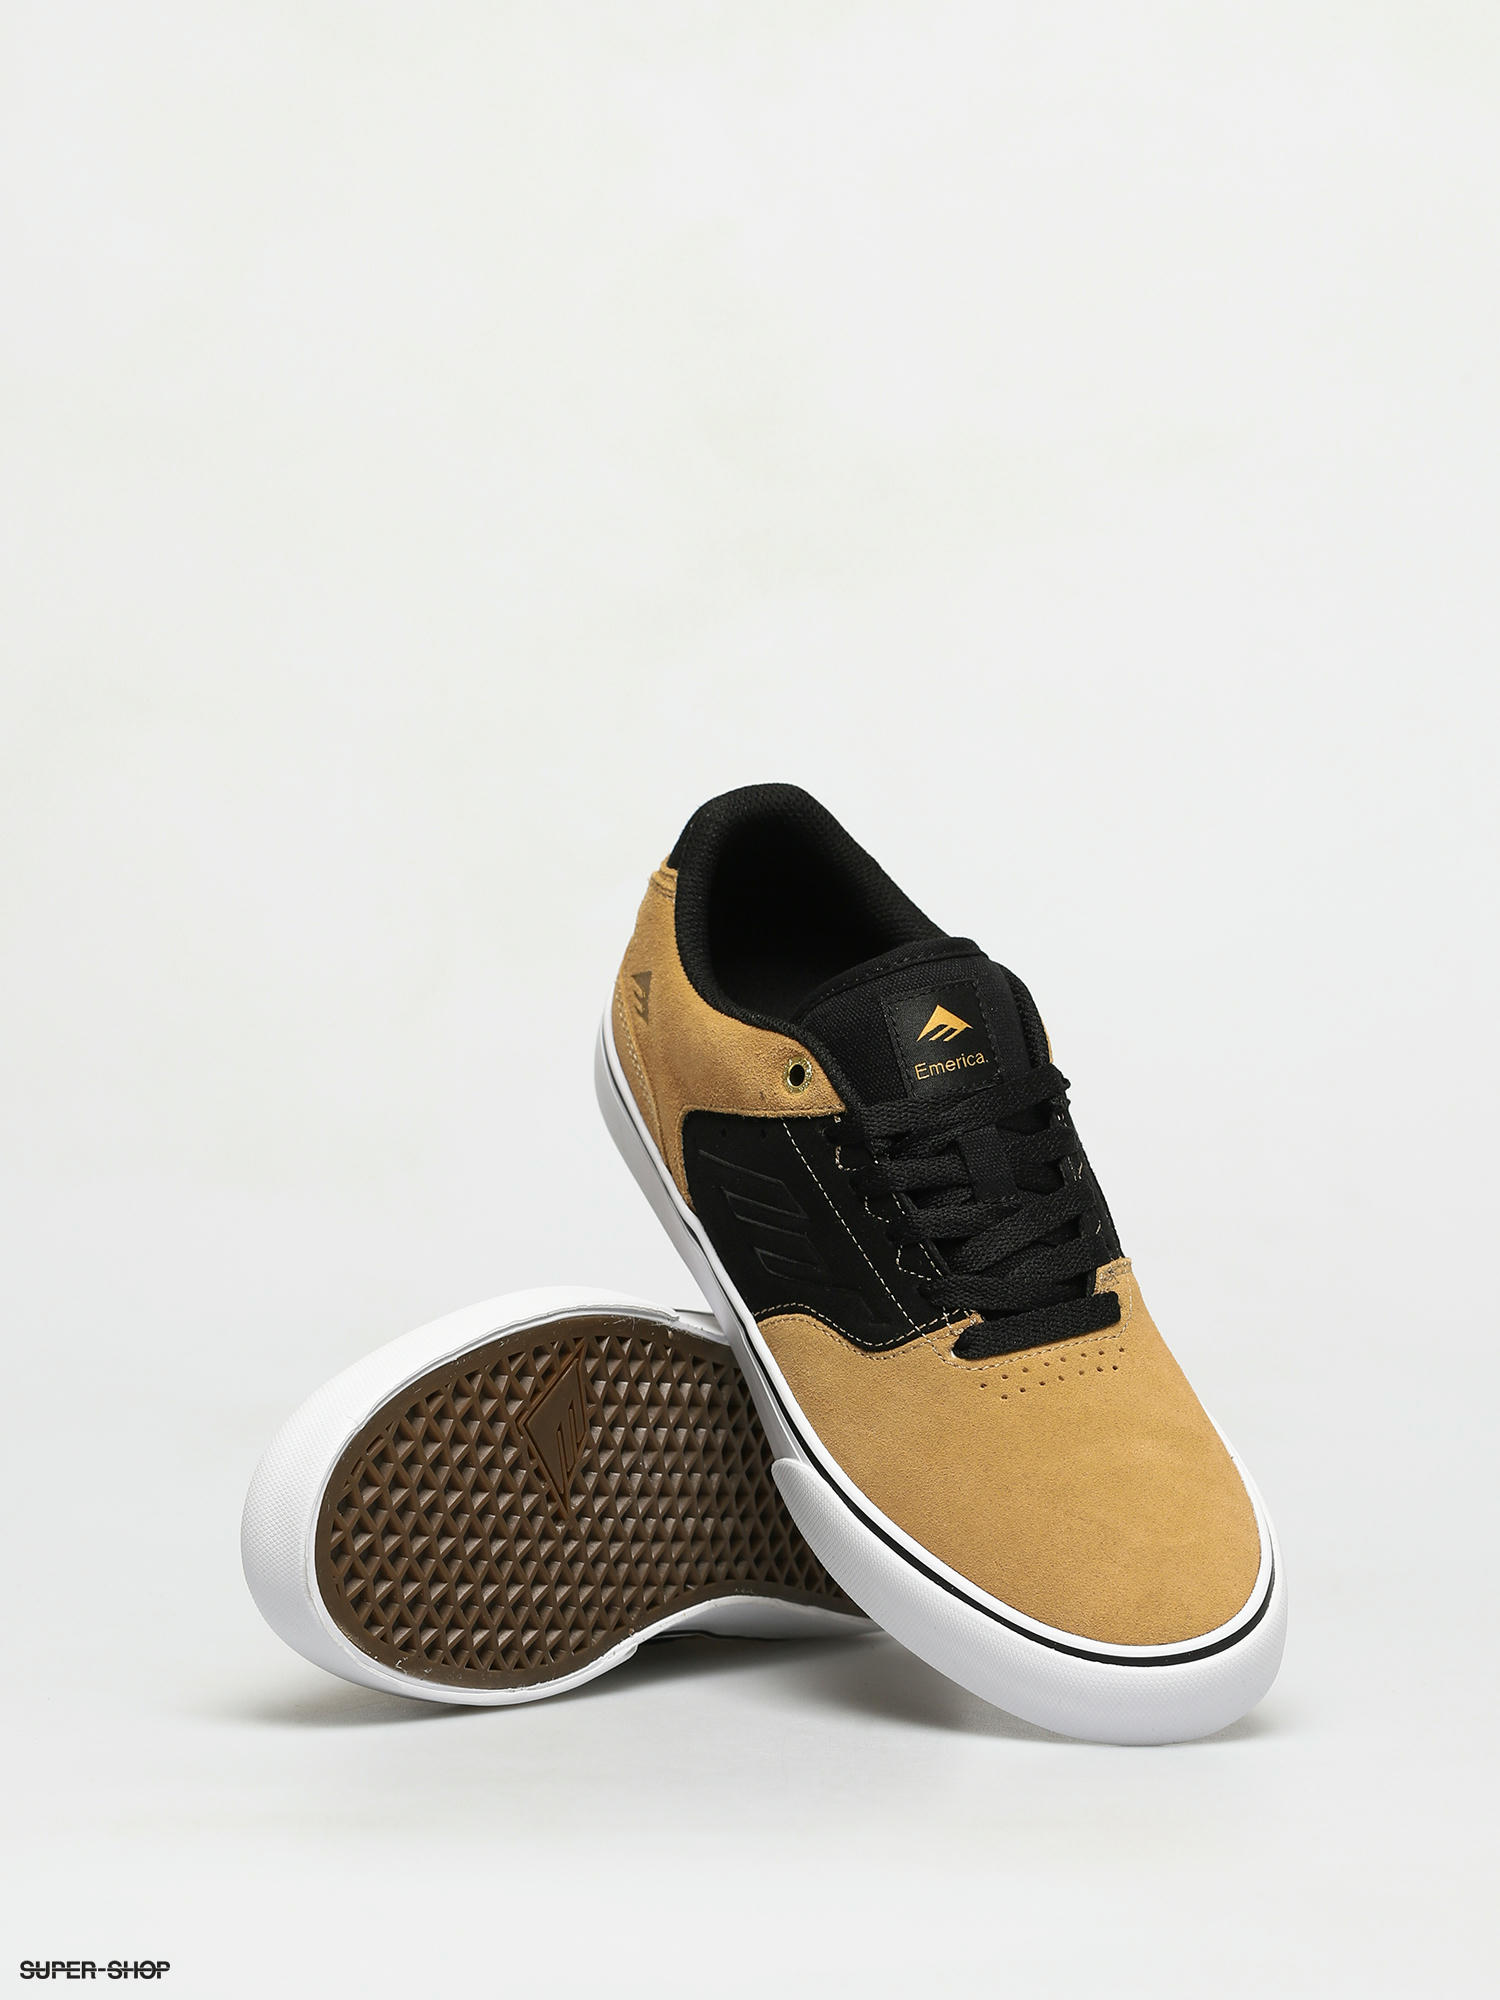 Emerica The Low Vulc Shoes (gold/black)